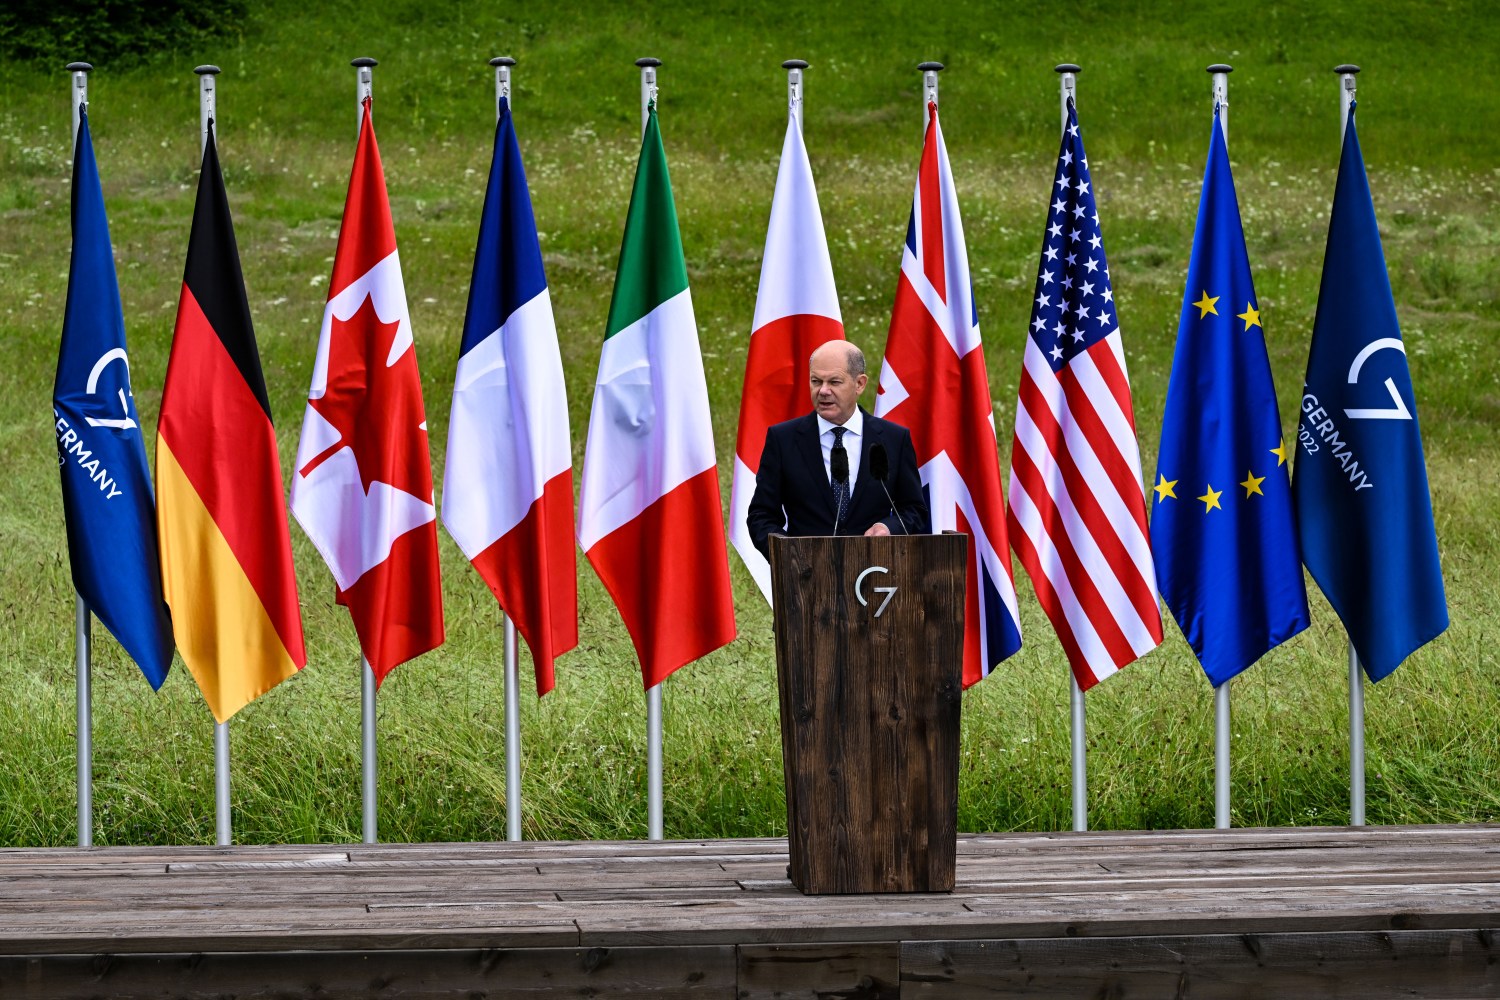 German Chancellor Olaf Scholz (SPD) speaks at a press conference at the end of the G-7 summit at Schloss Elmau.